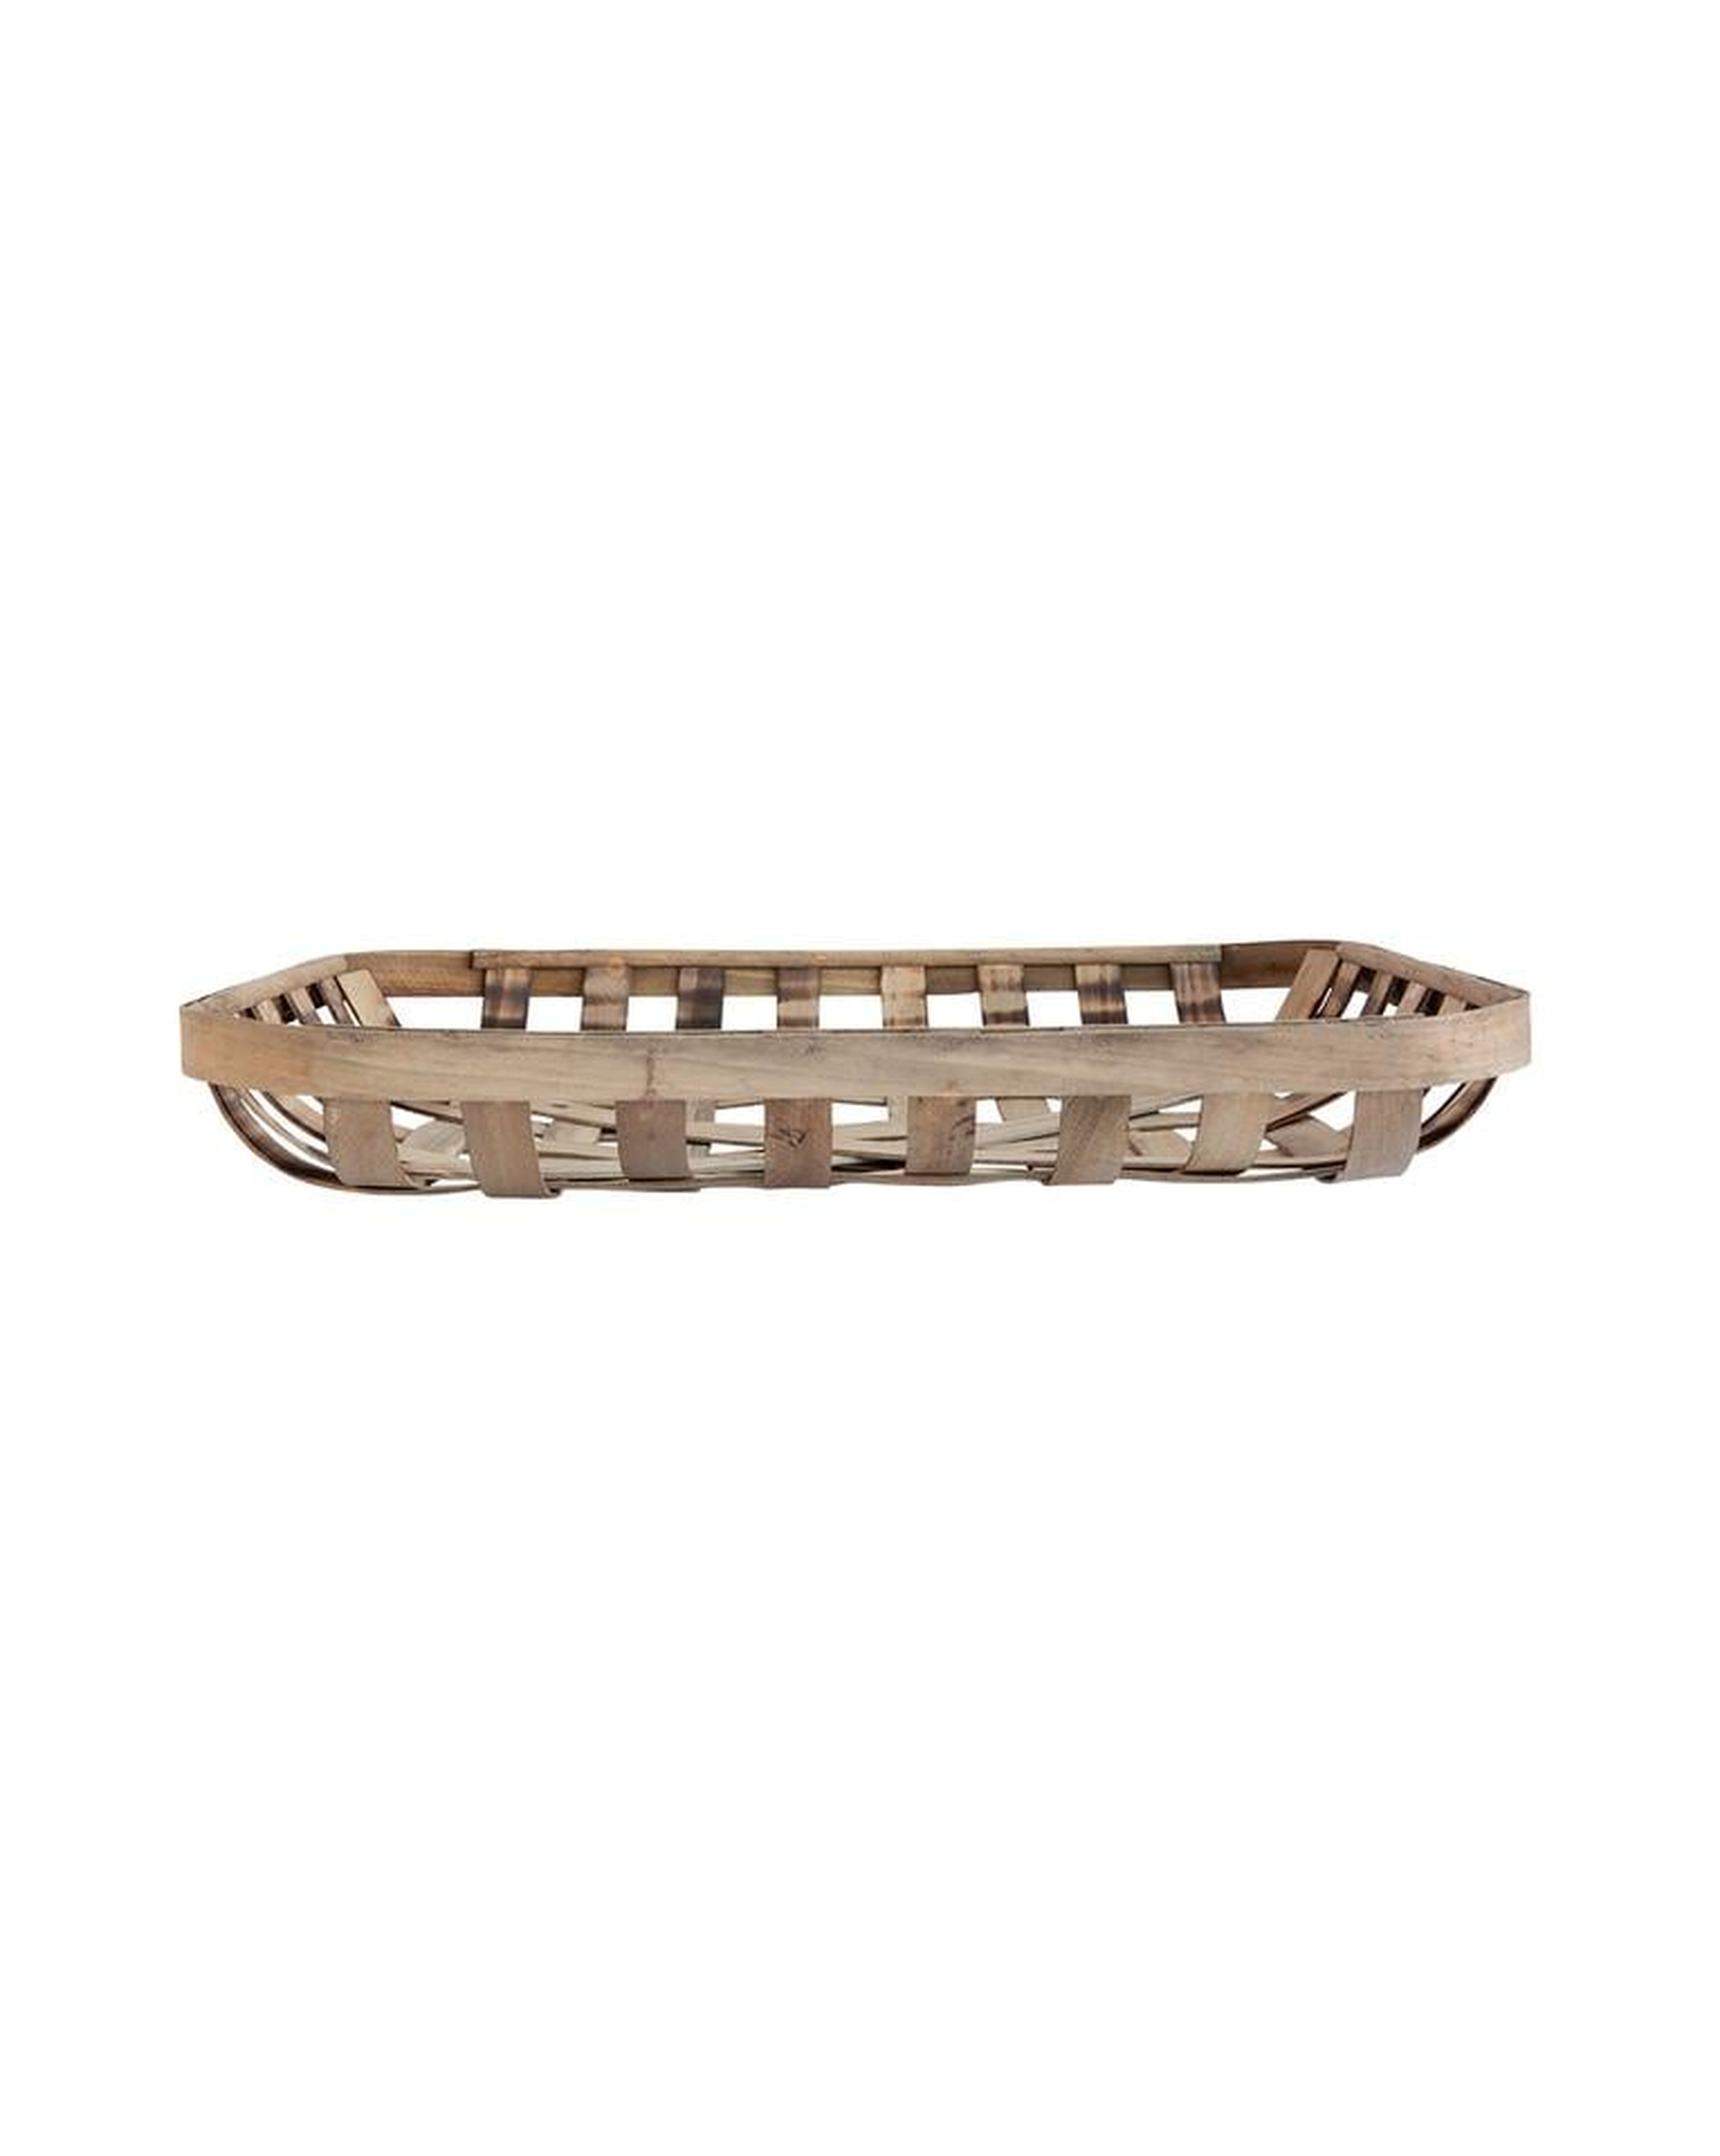 WOODEN STRIP BASKET - SMALL - McGee & Co.